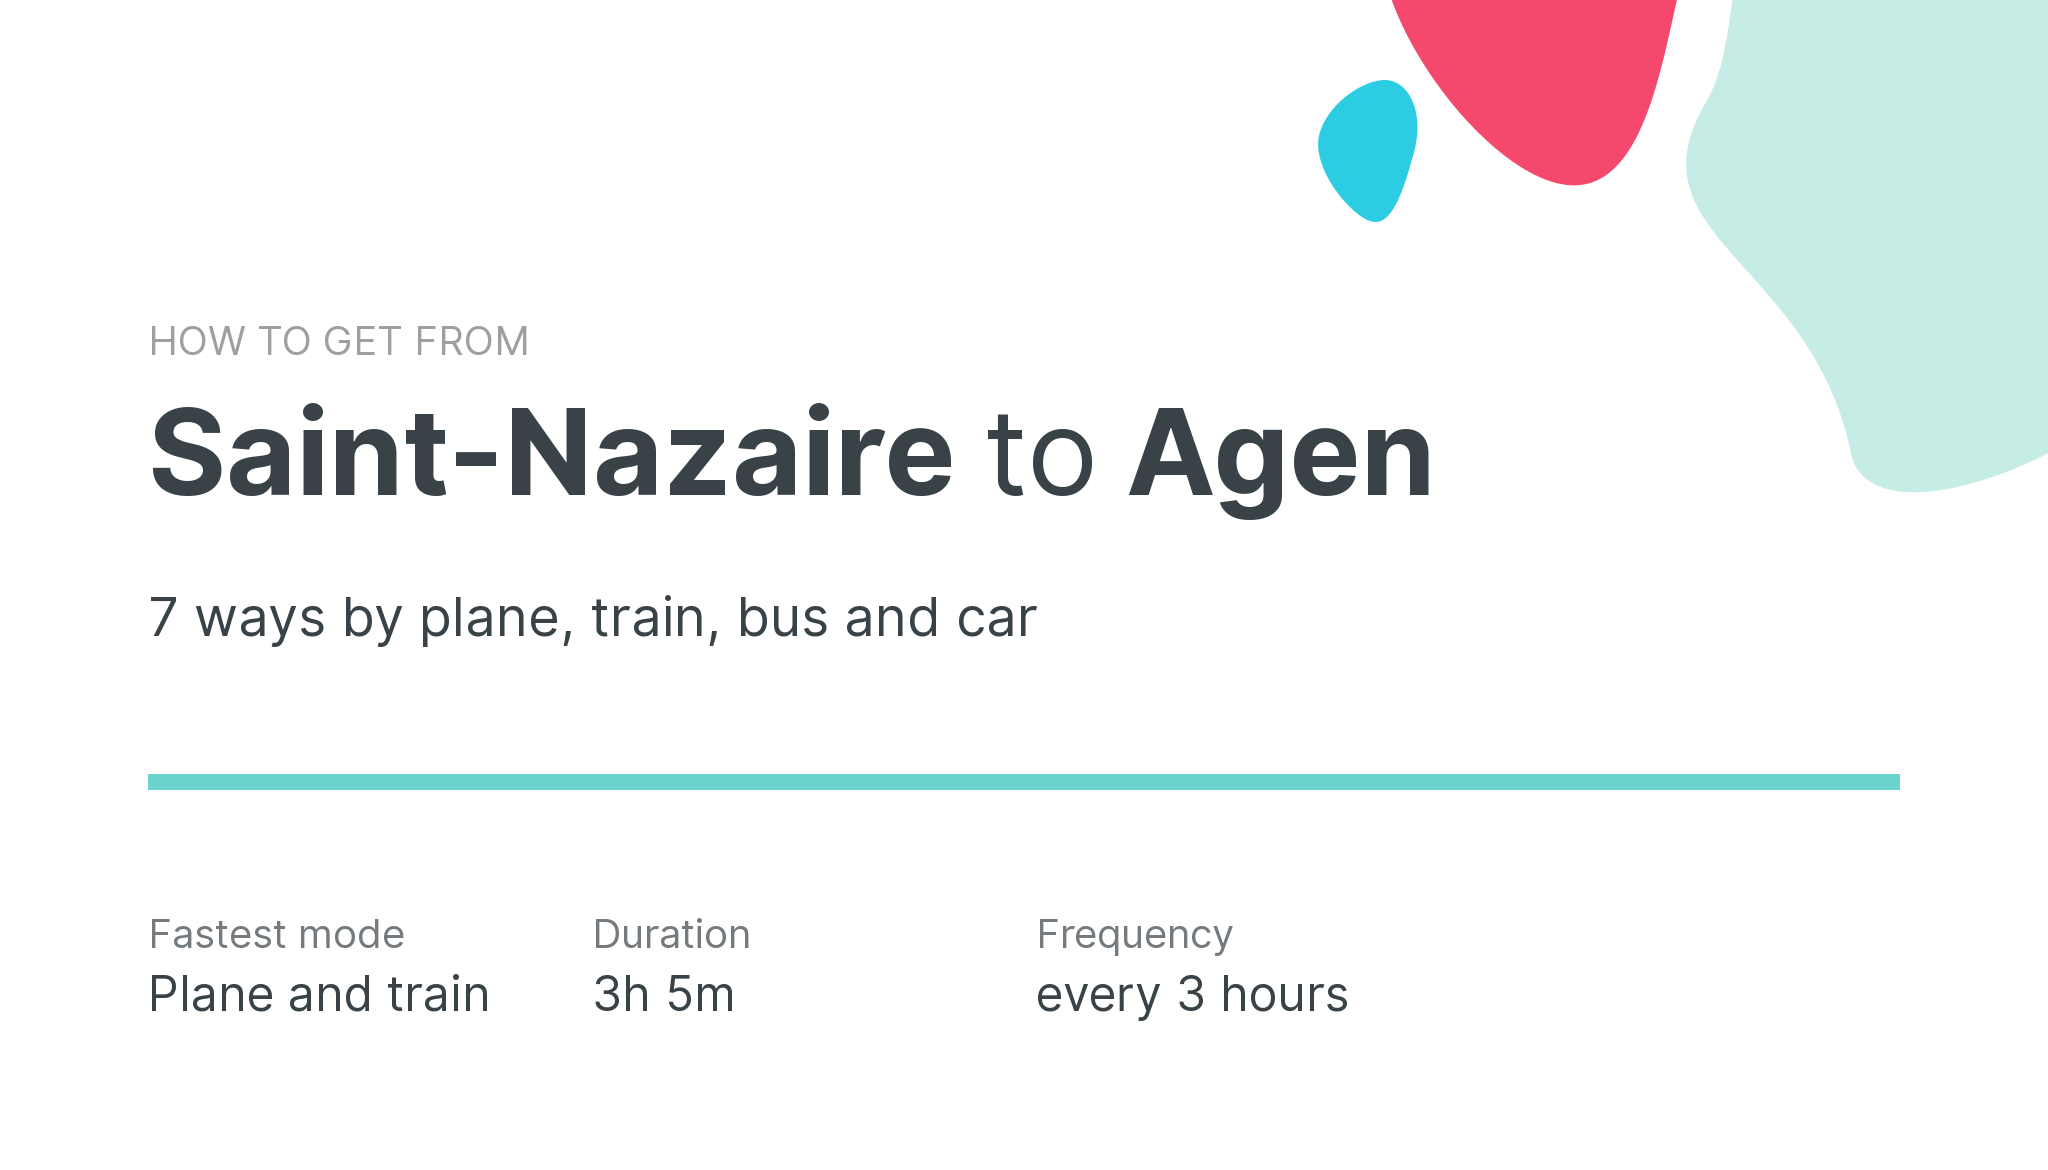 How do I get from Saint-Nazaire to Agen